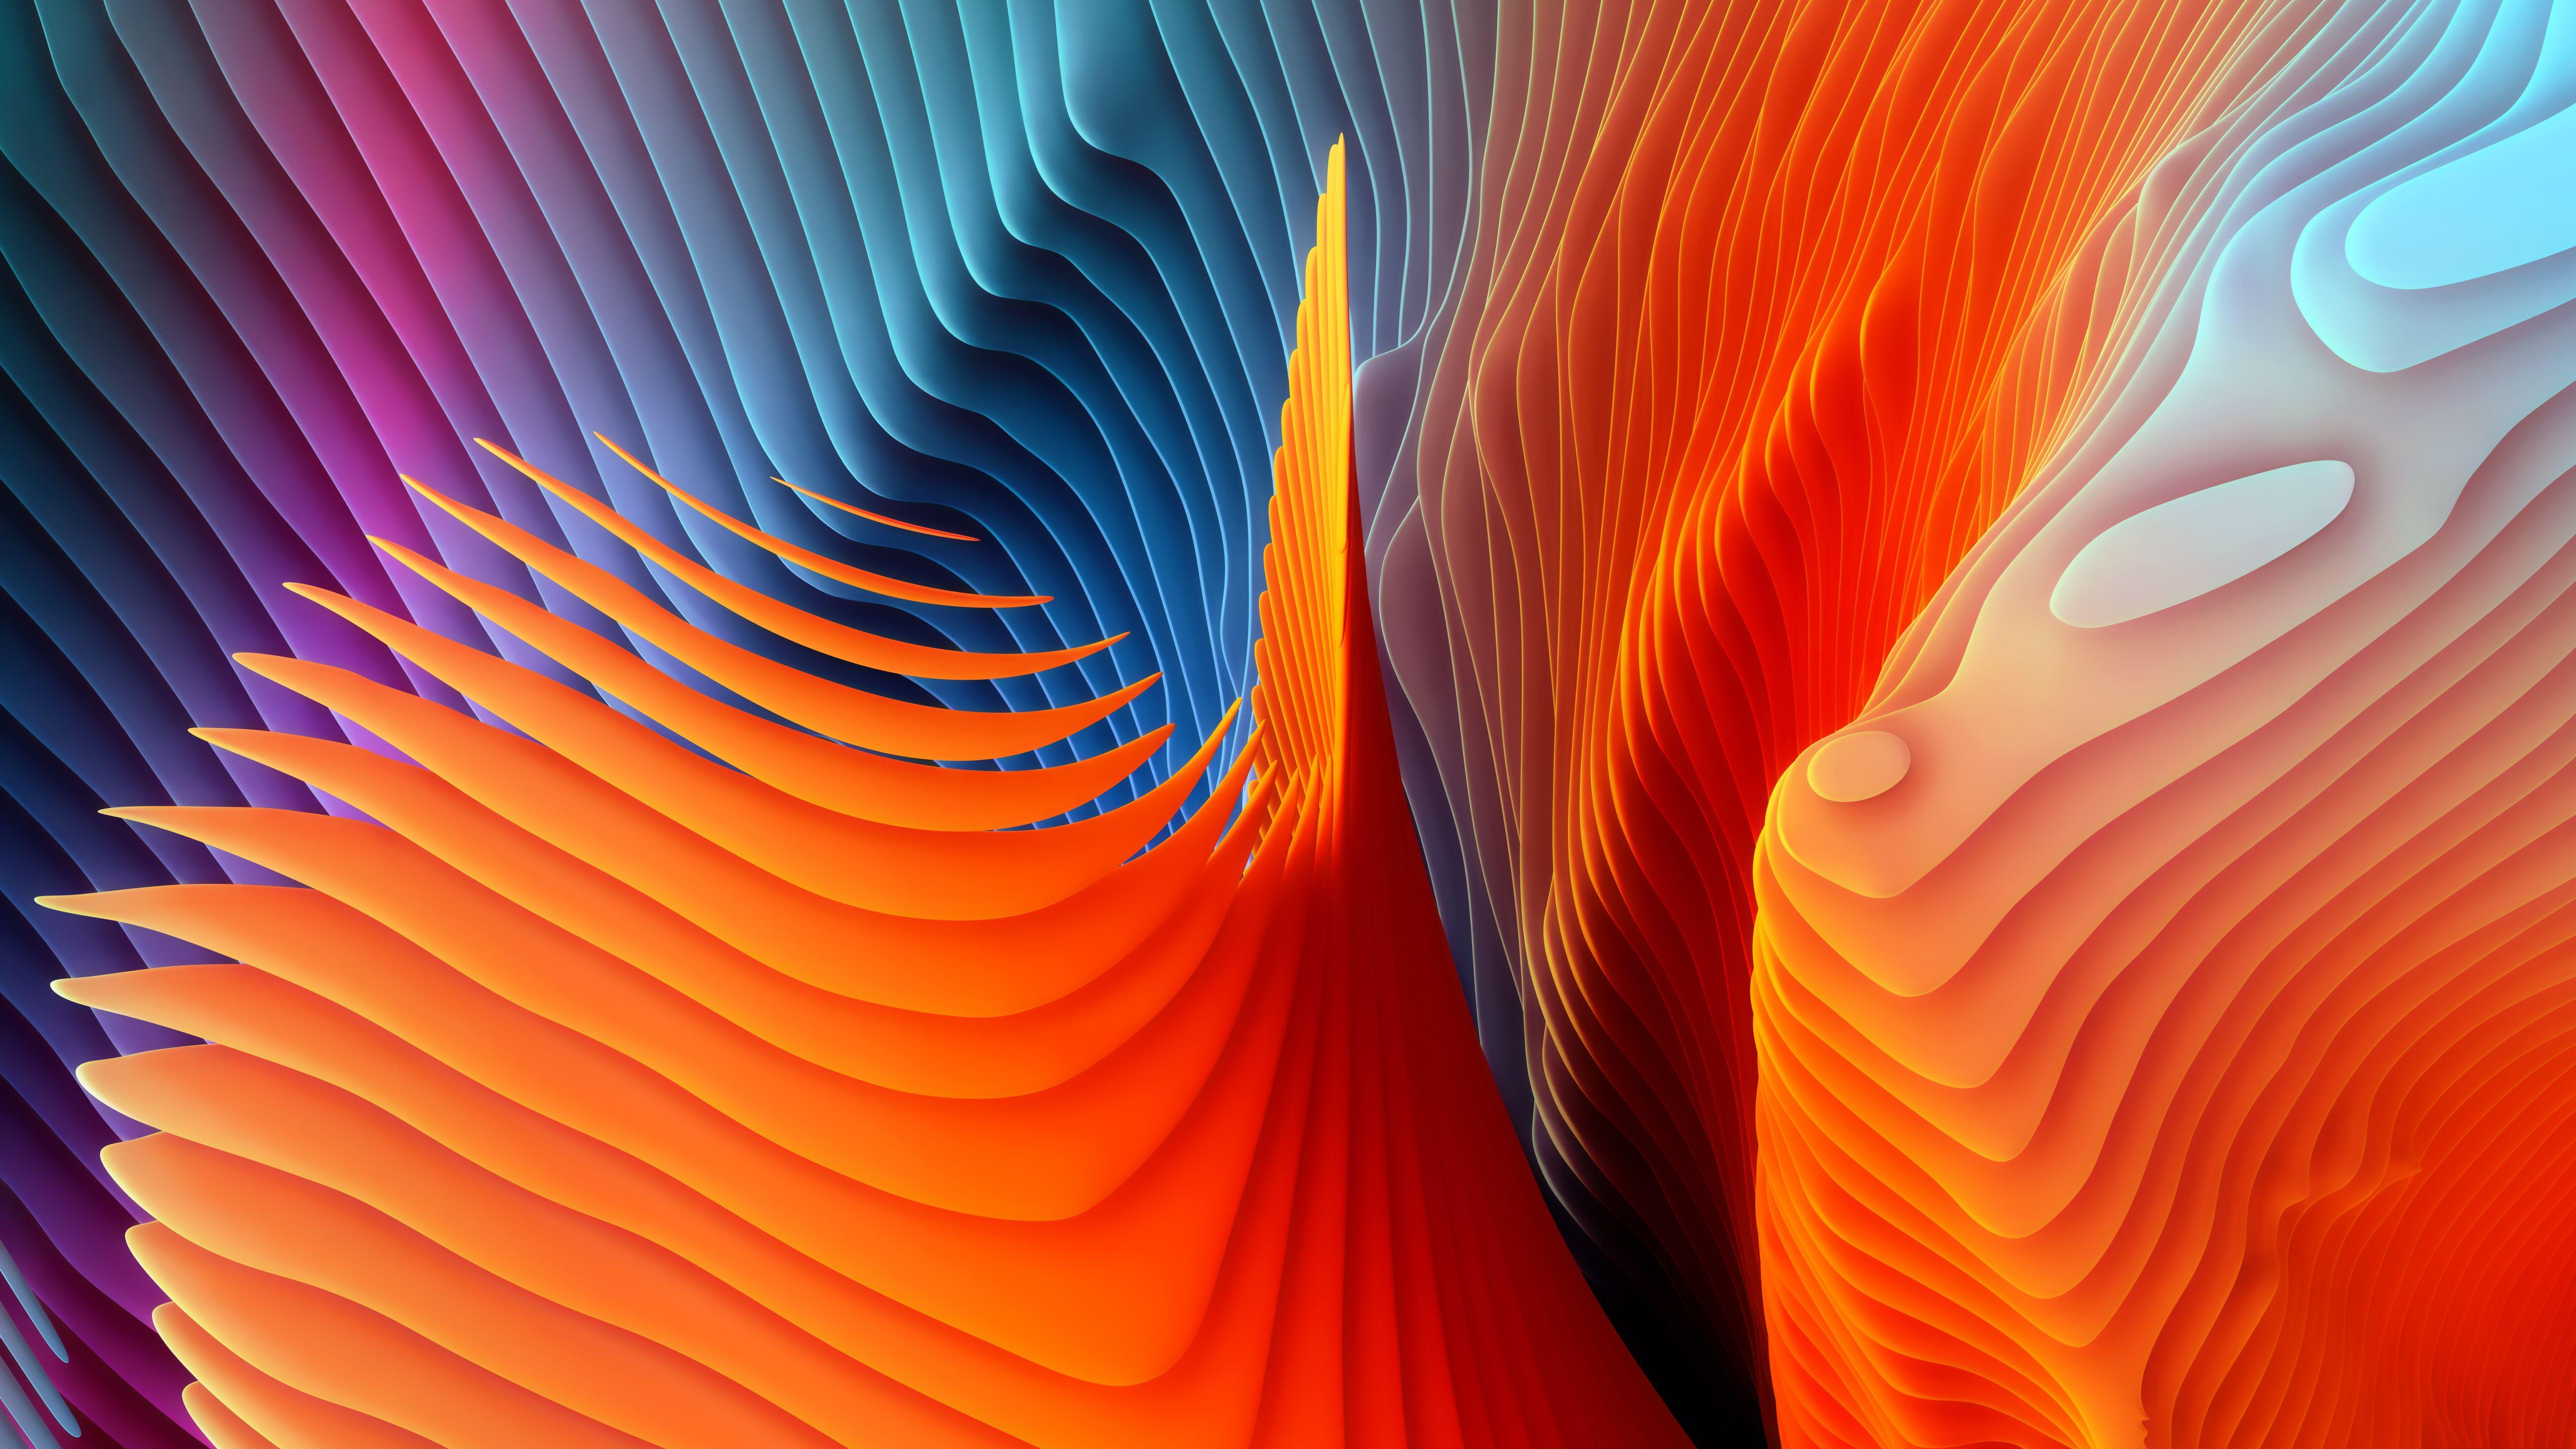 Download New Color Splash & Abstract Shapes Wallpaper from macOS Sierra 10.12.2